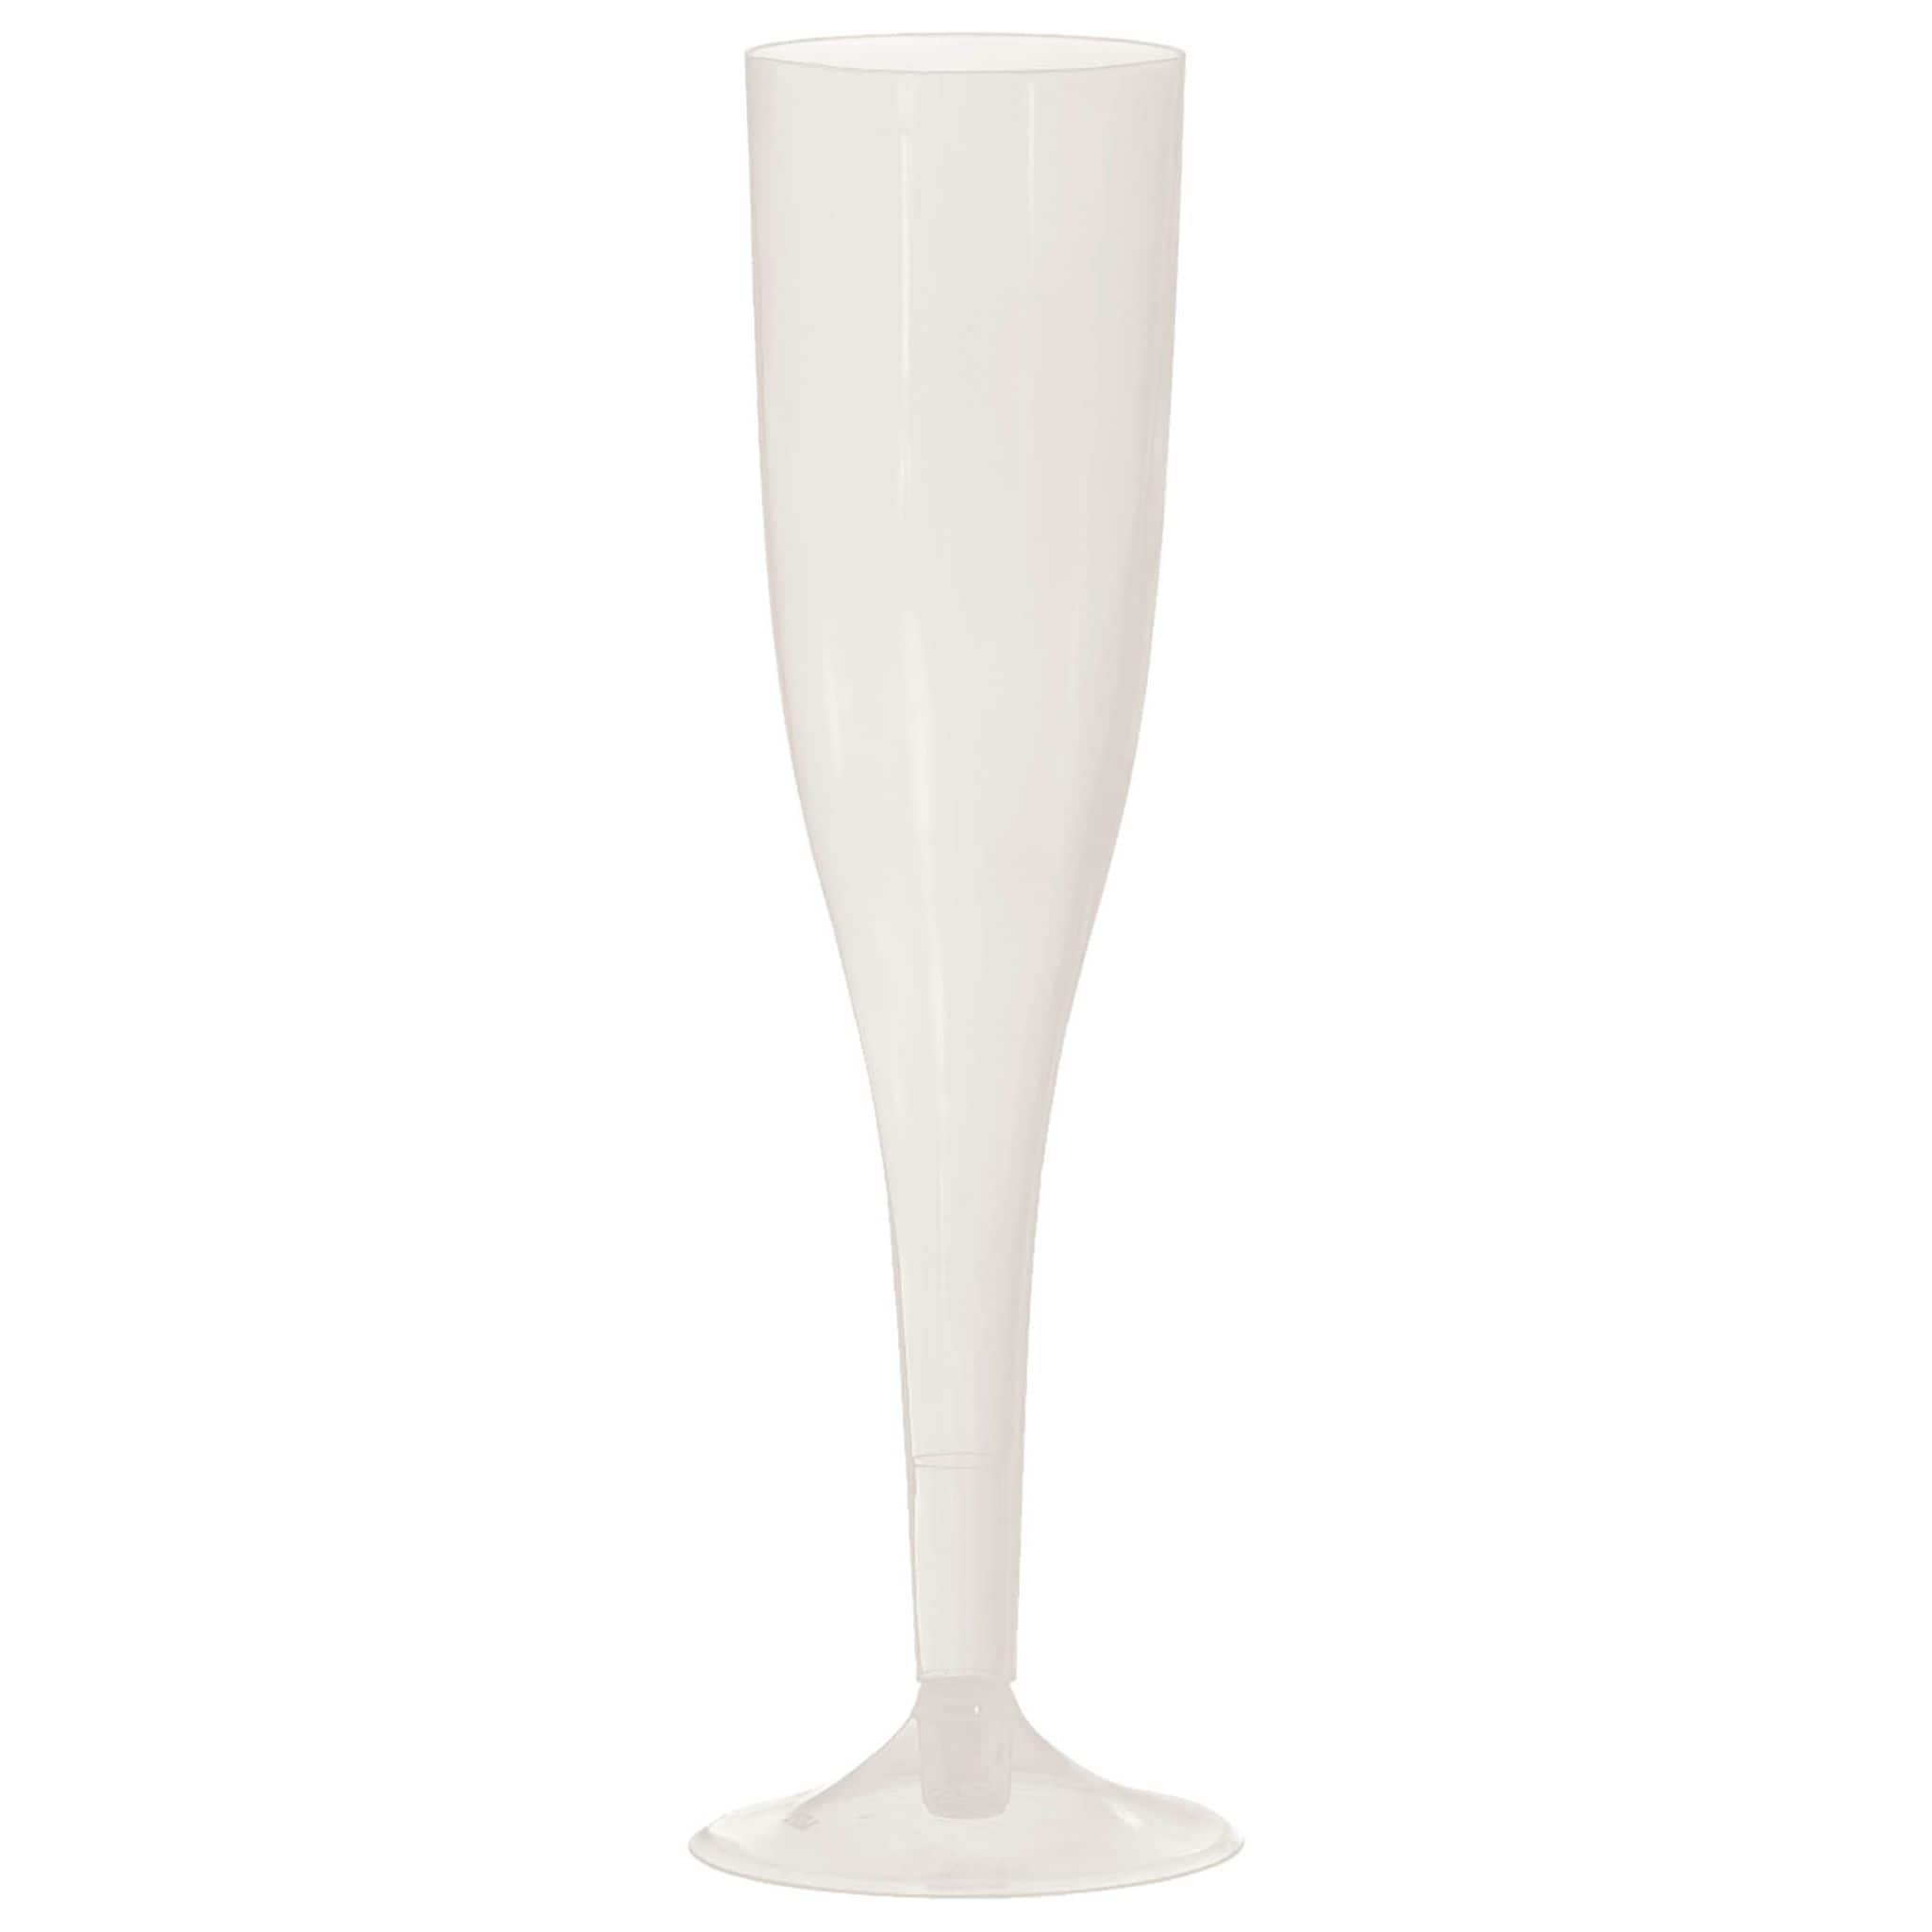 5.5oz Big Party Pack Pearlized White Champagne Flutes, 20ct.